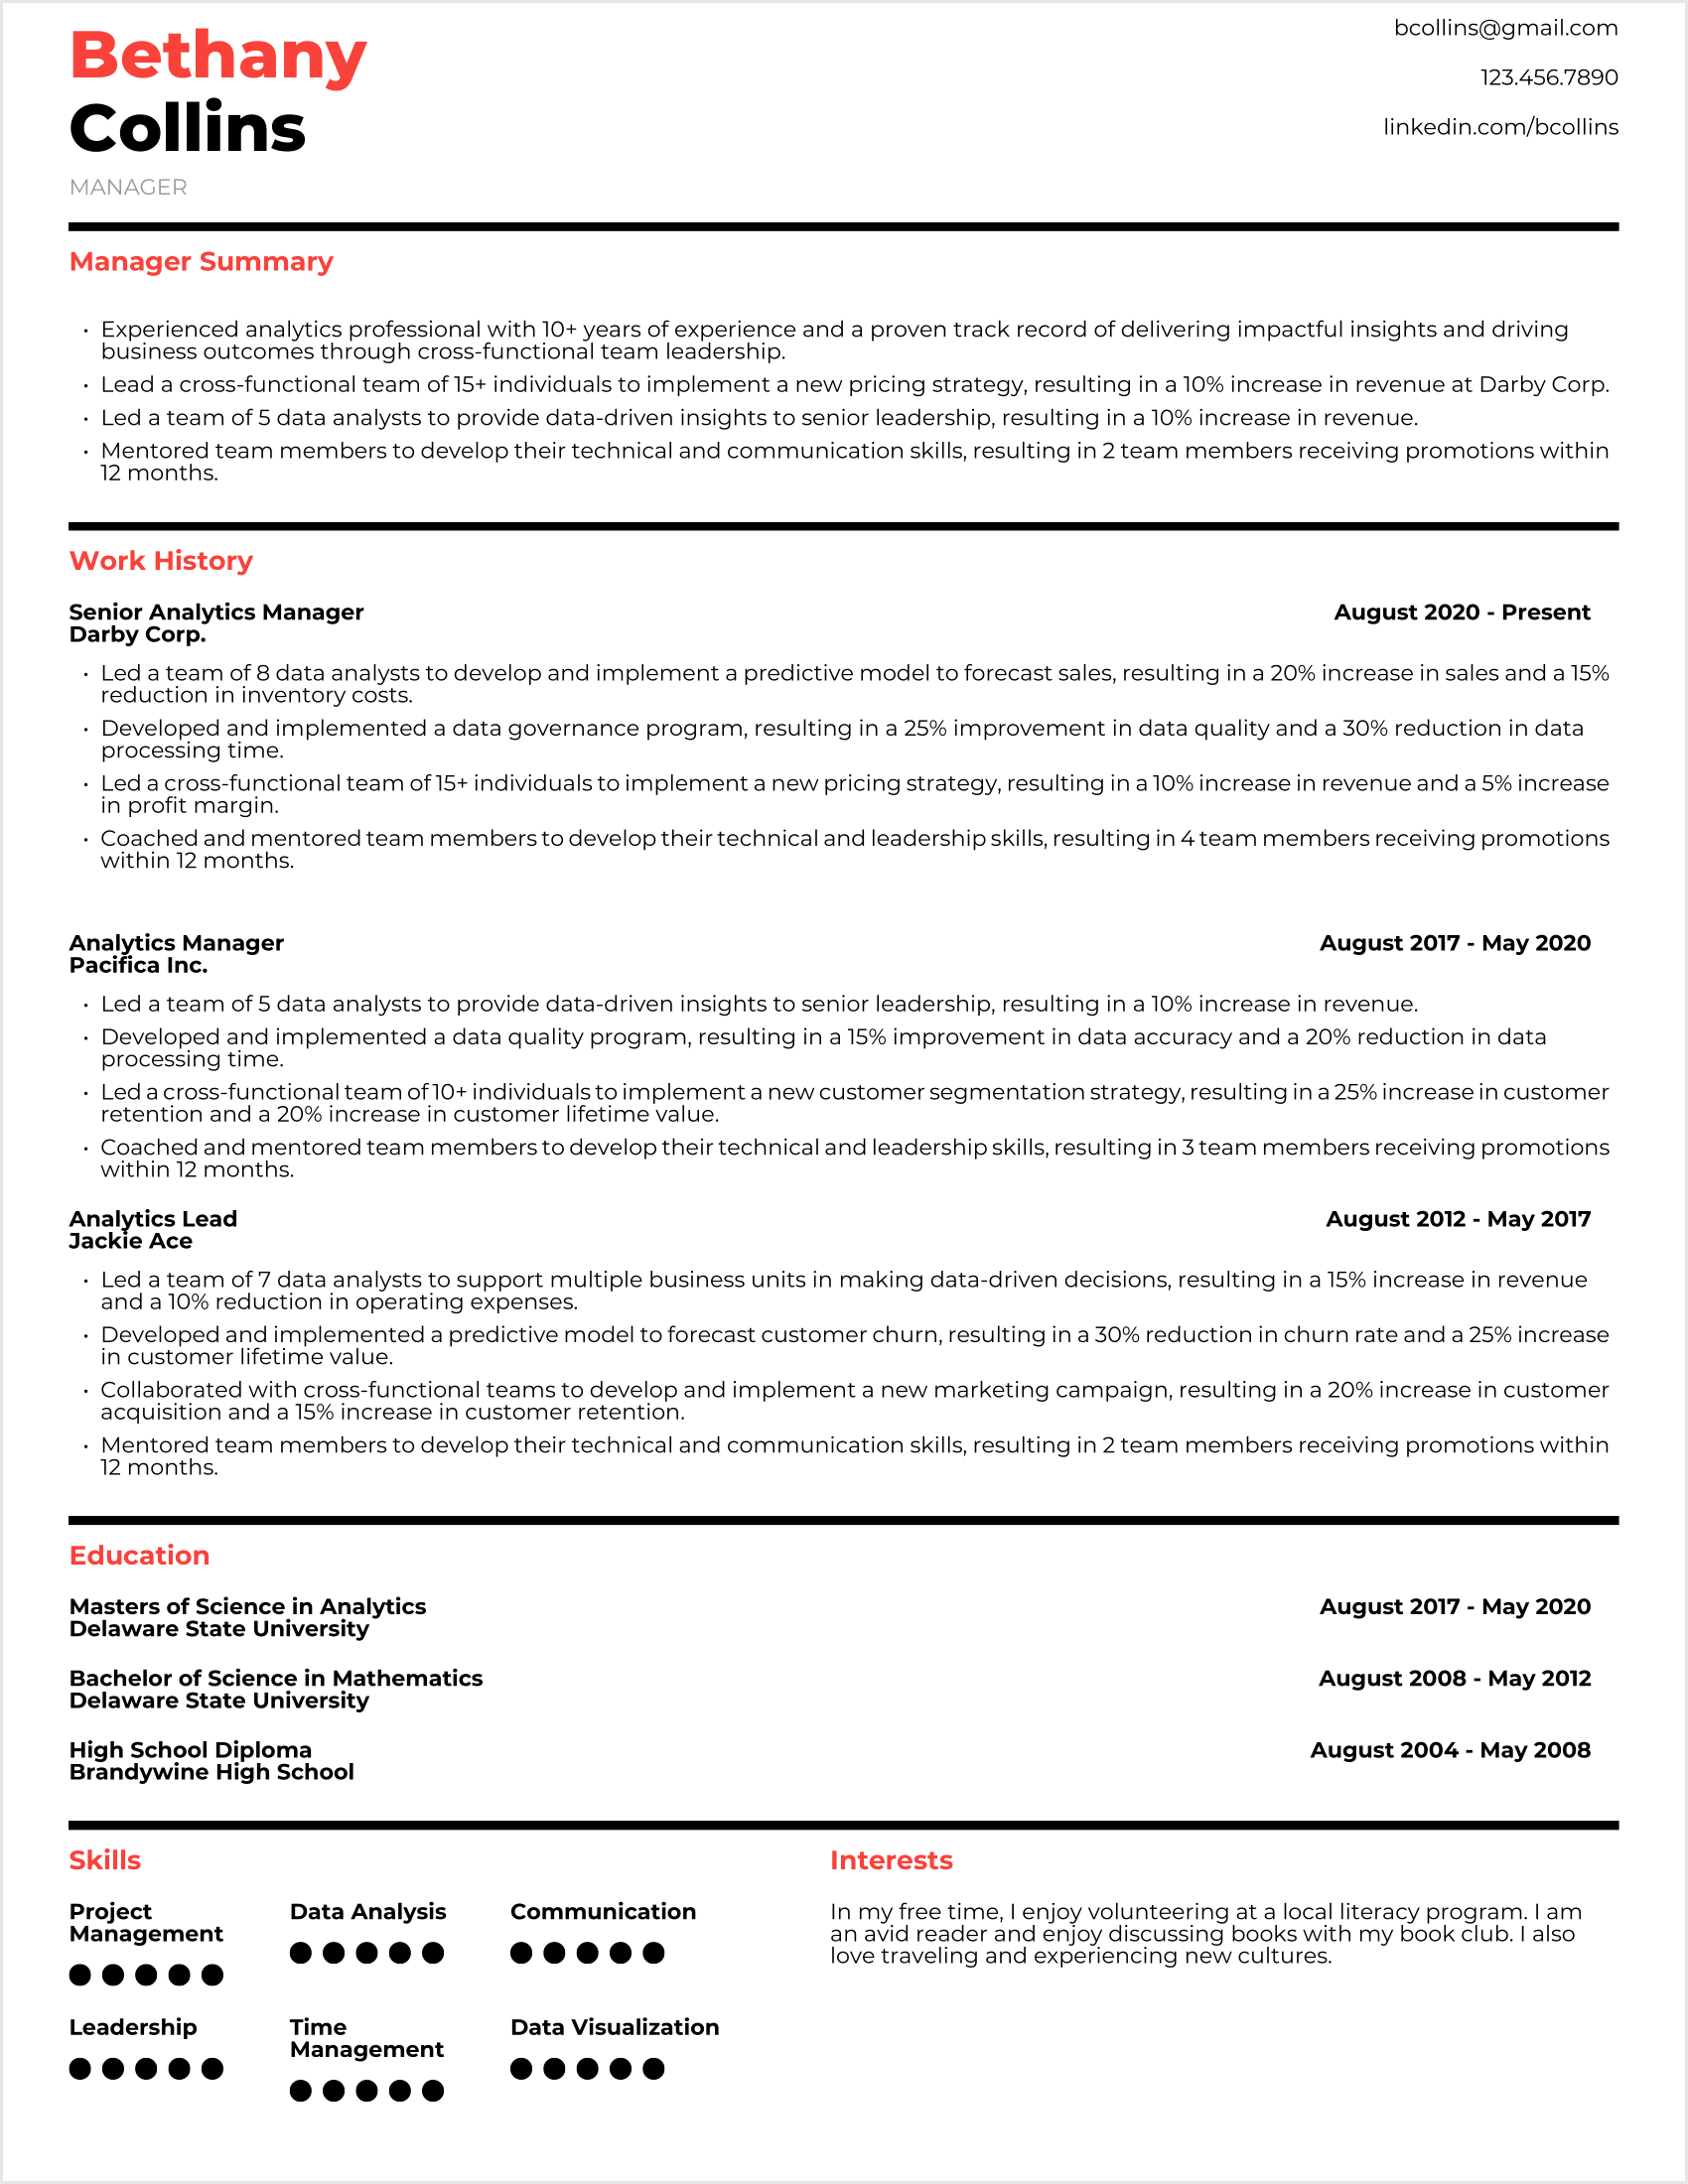 Manager Resume Example #2